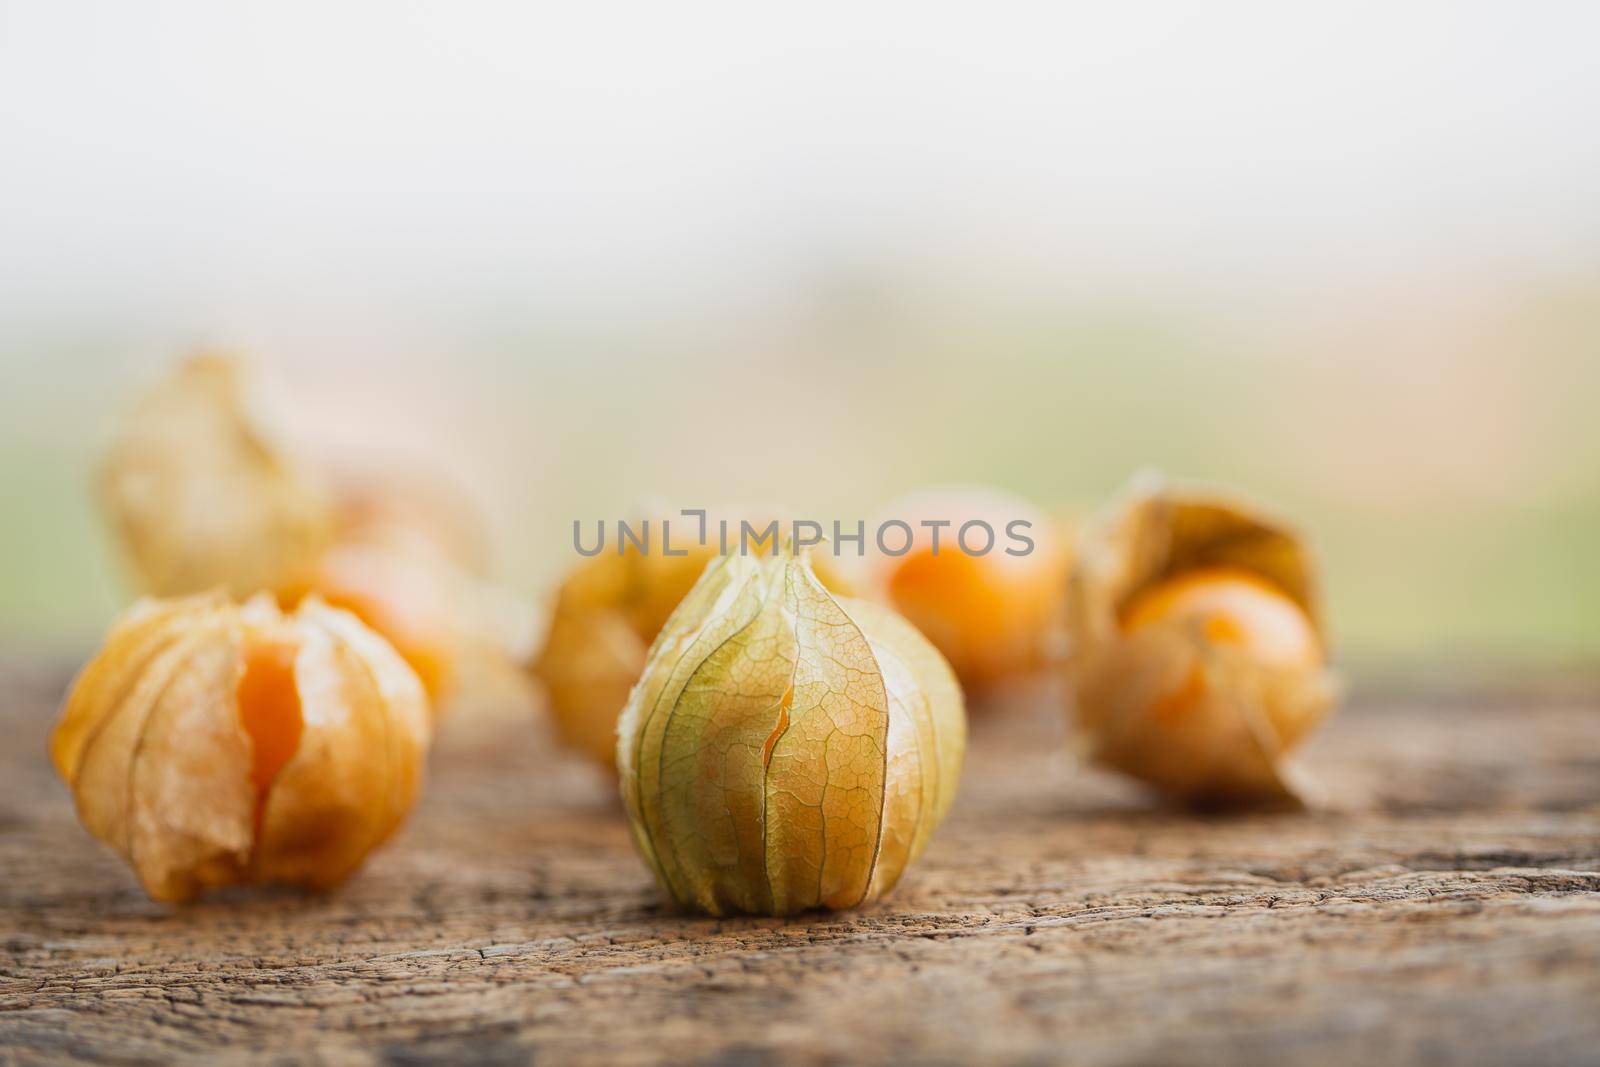 Cape Gooseberries Group by Wasant